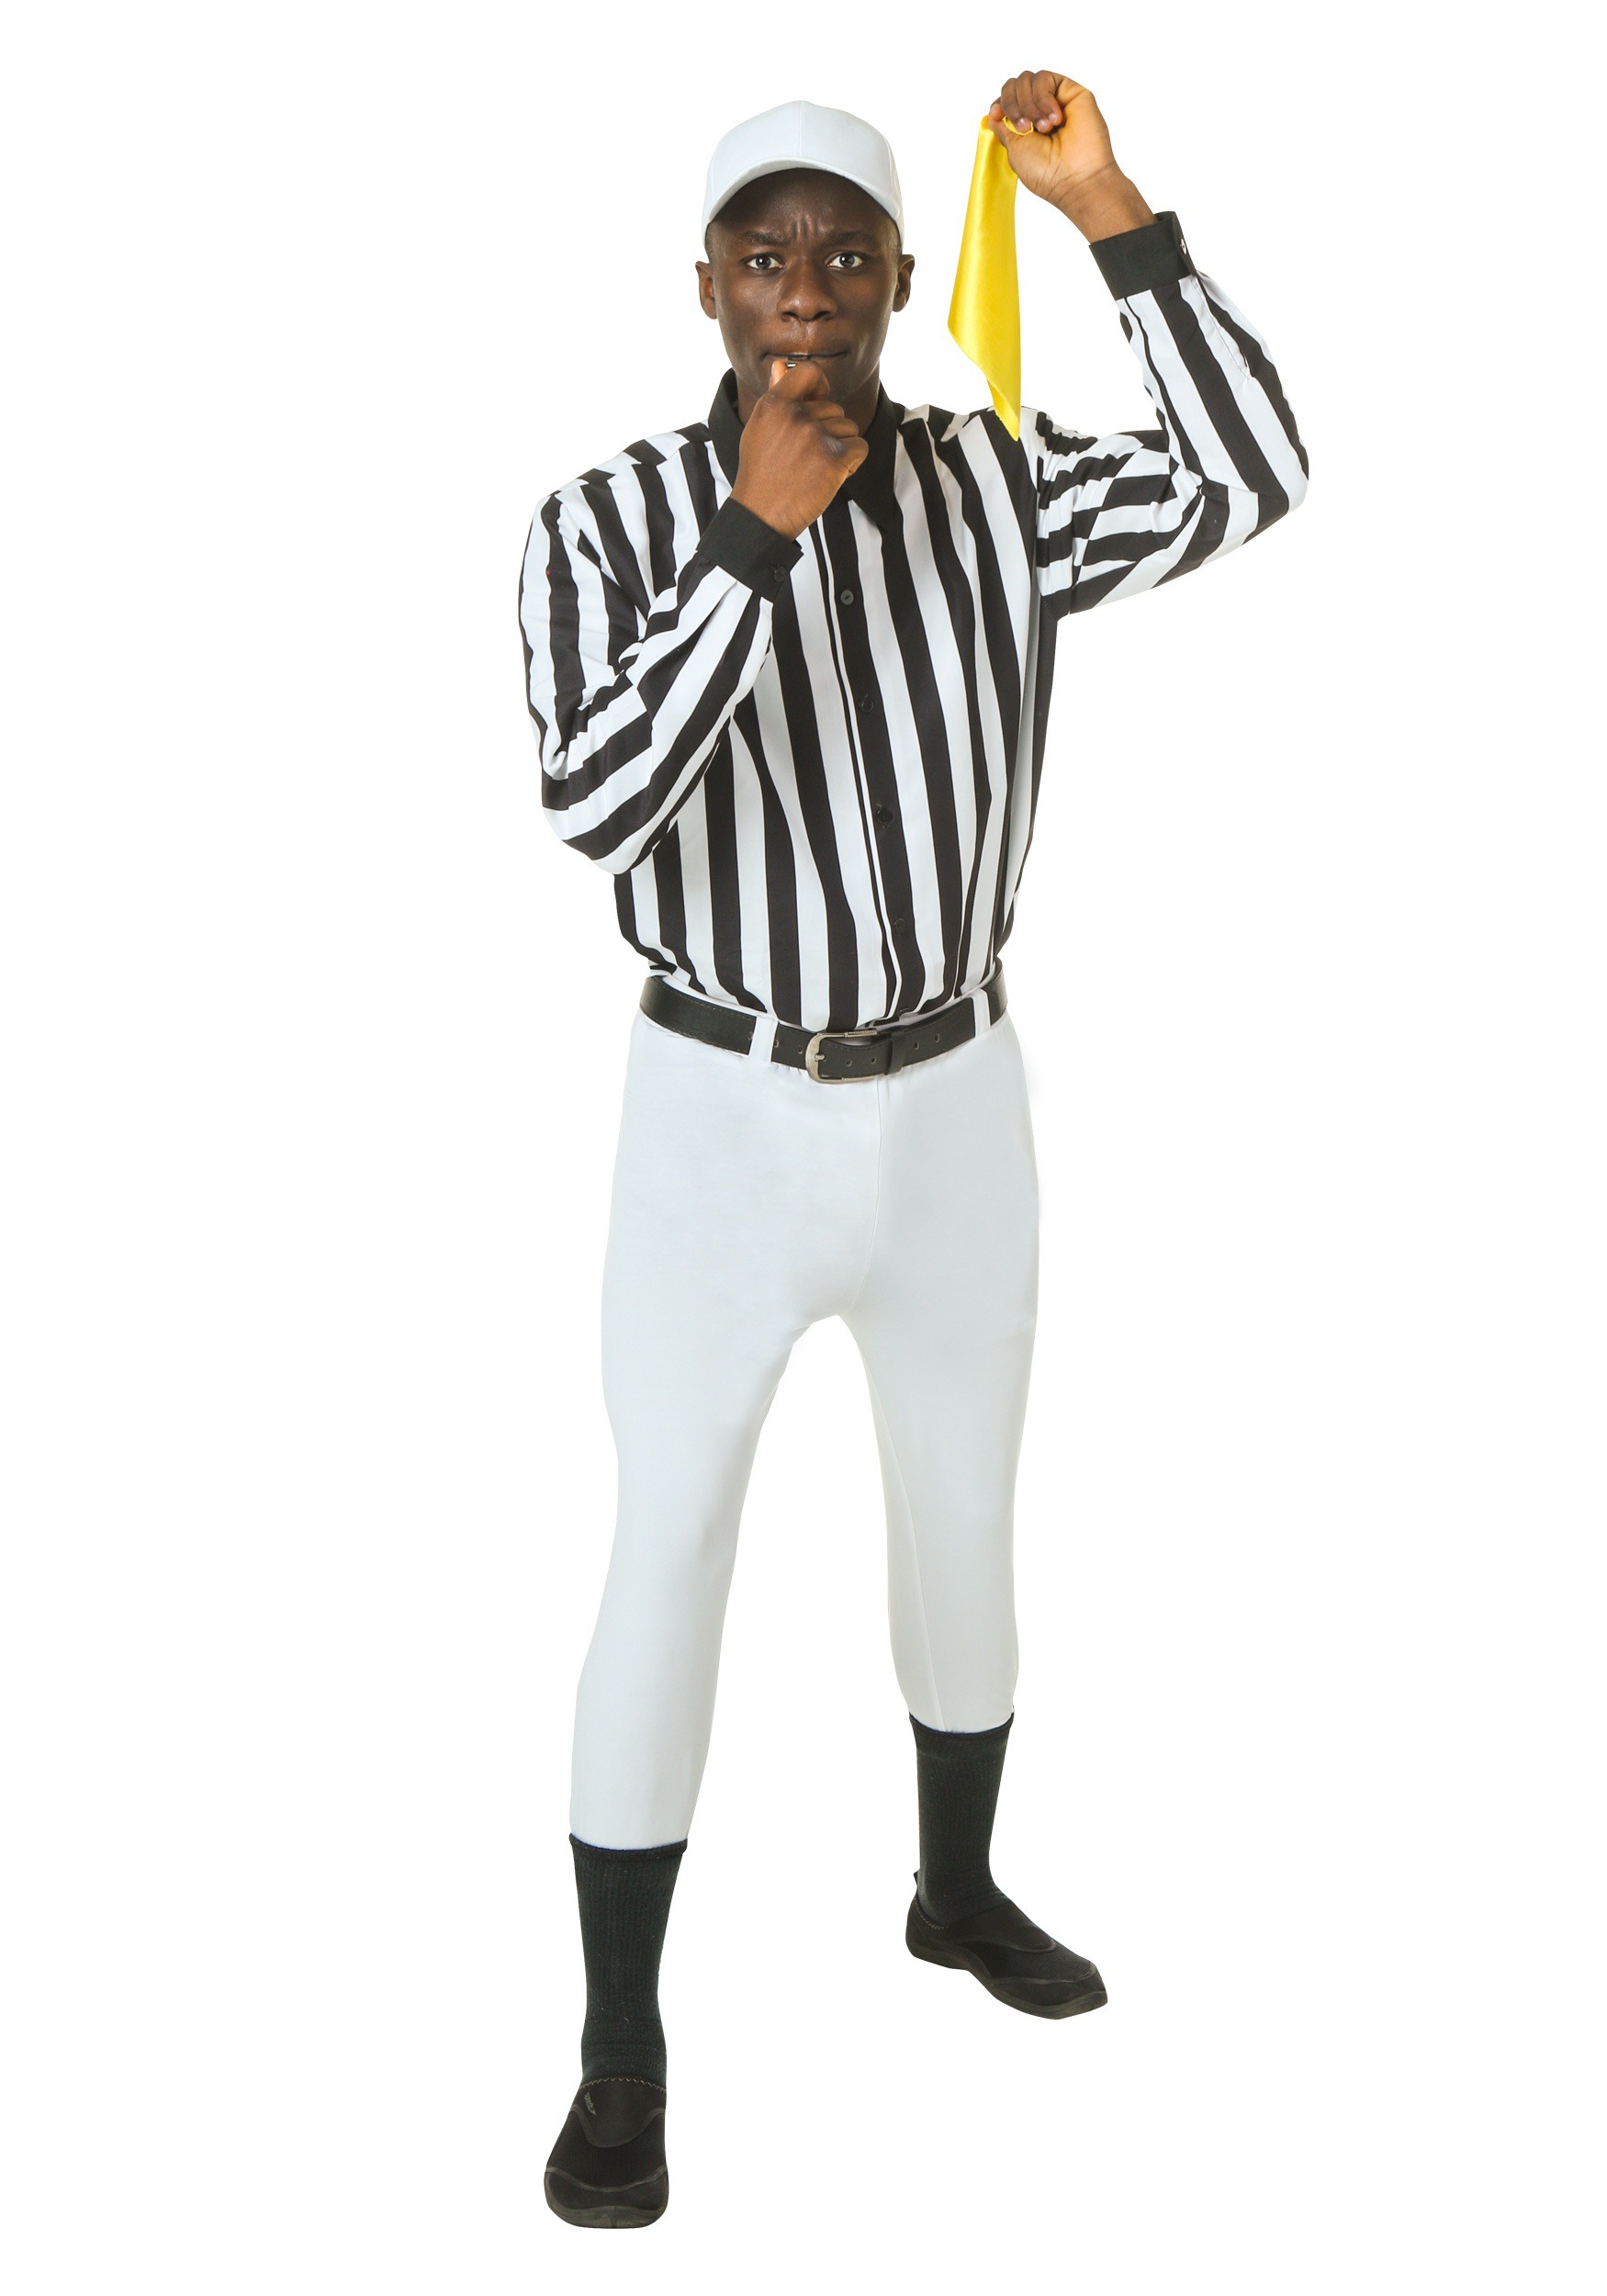 Plus Size Referee Costume for Adults